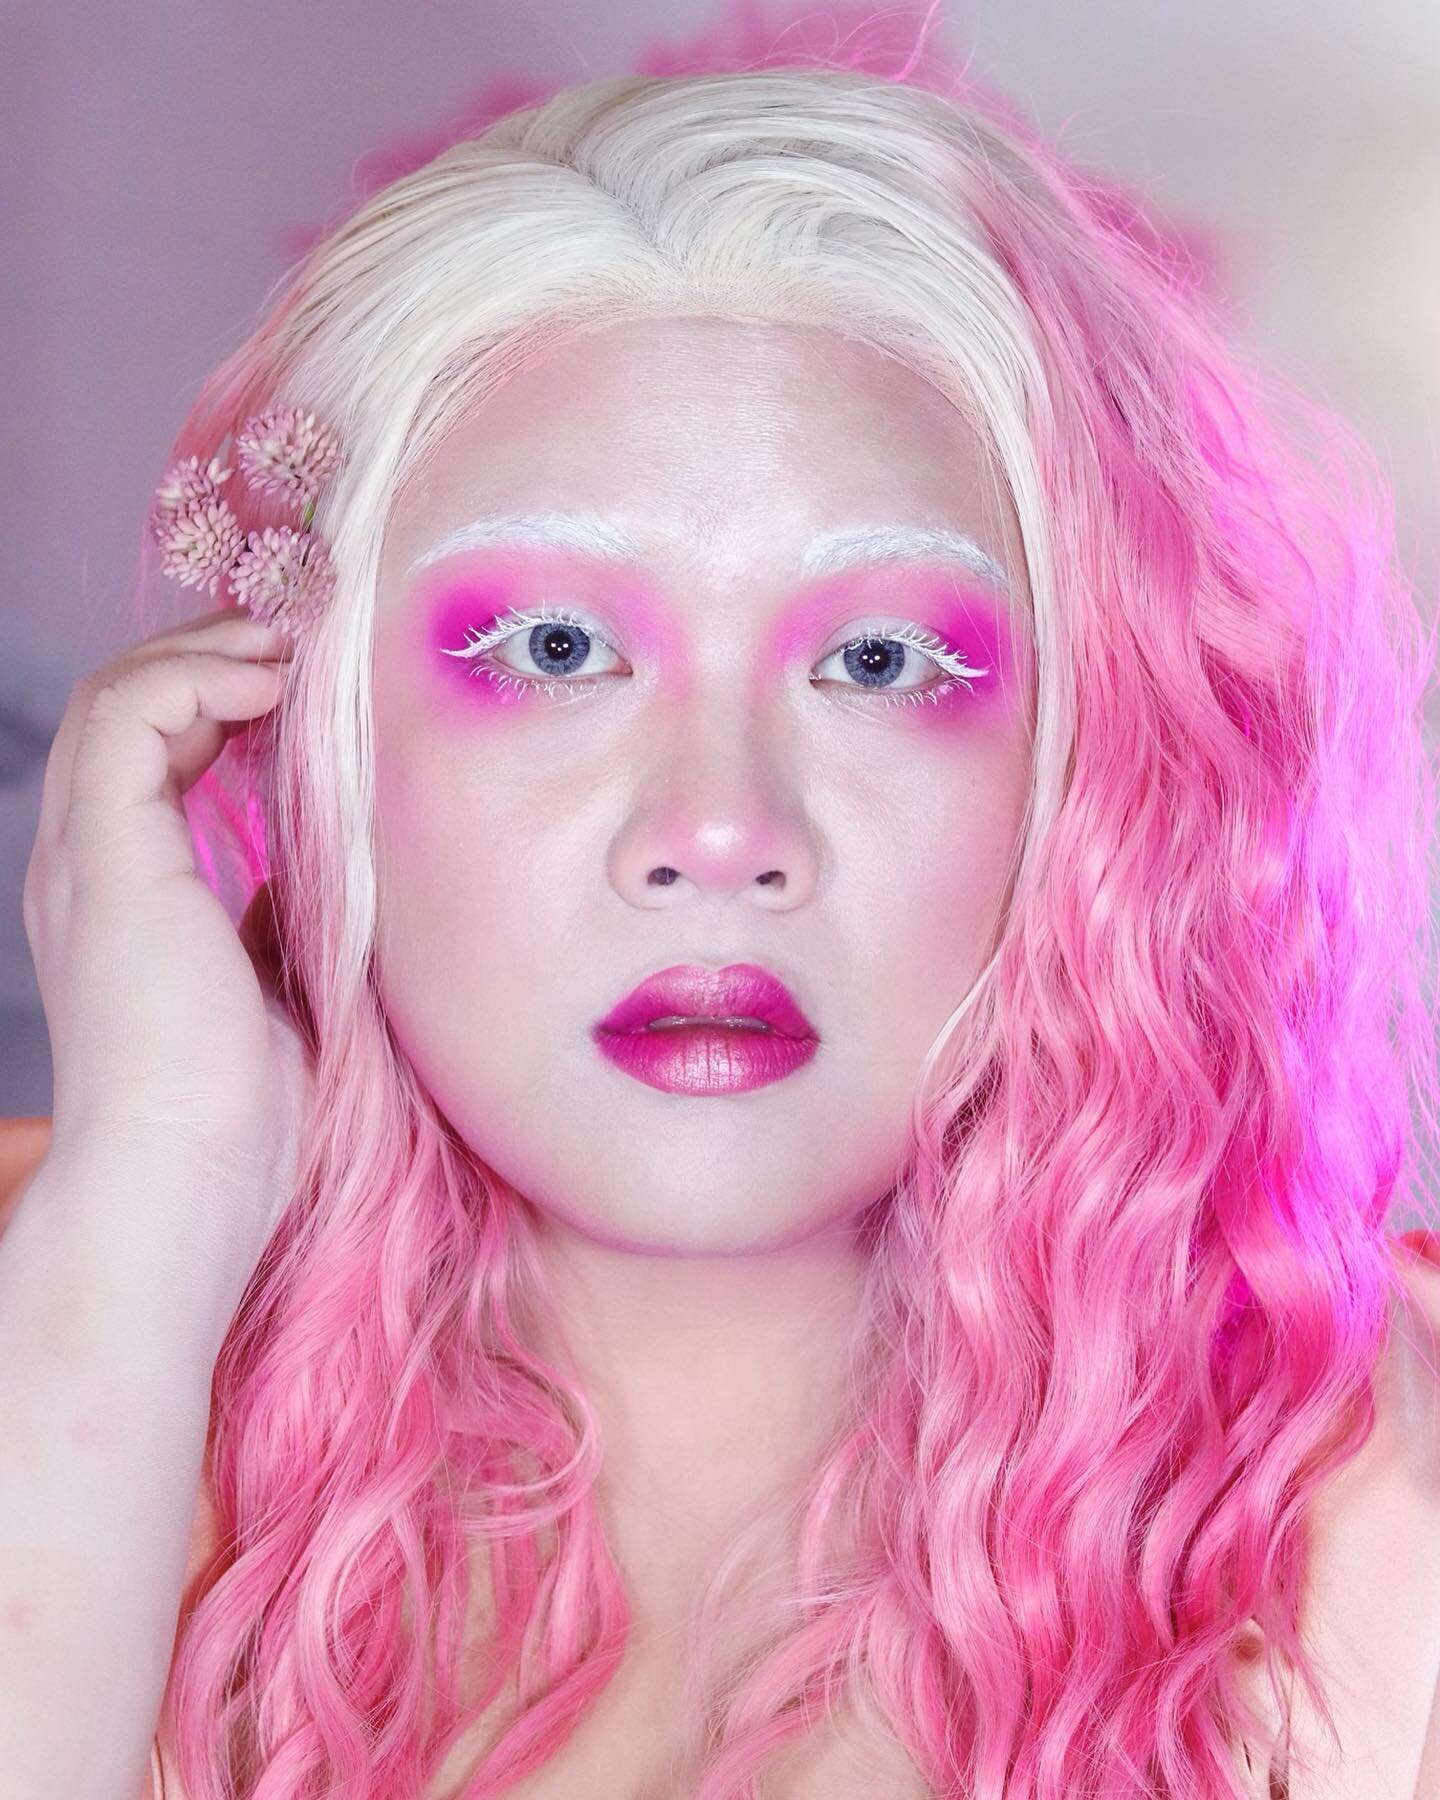 If I turned into a fairy, I like to imagine I&rsquo;d be impossibly pink. One might say &ldquo;aggressively pink.&rdquo; #fairymakeup #fairyhalloweenmakeup